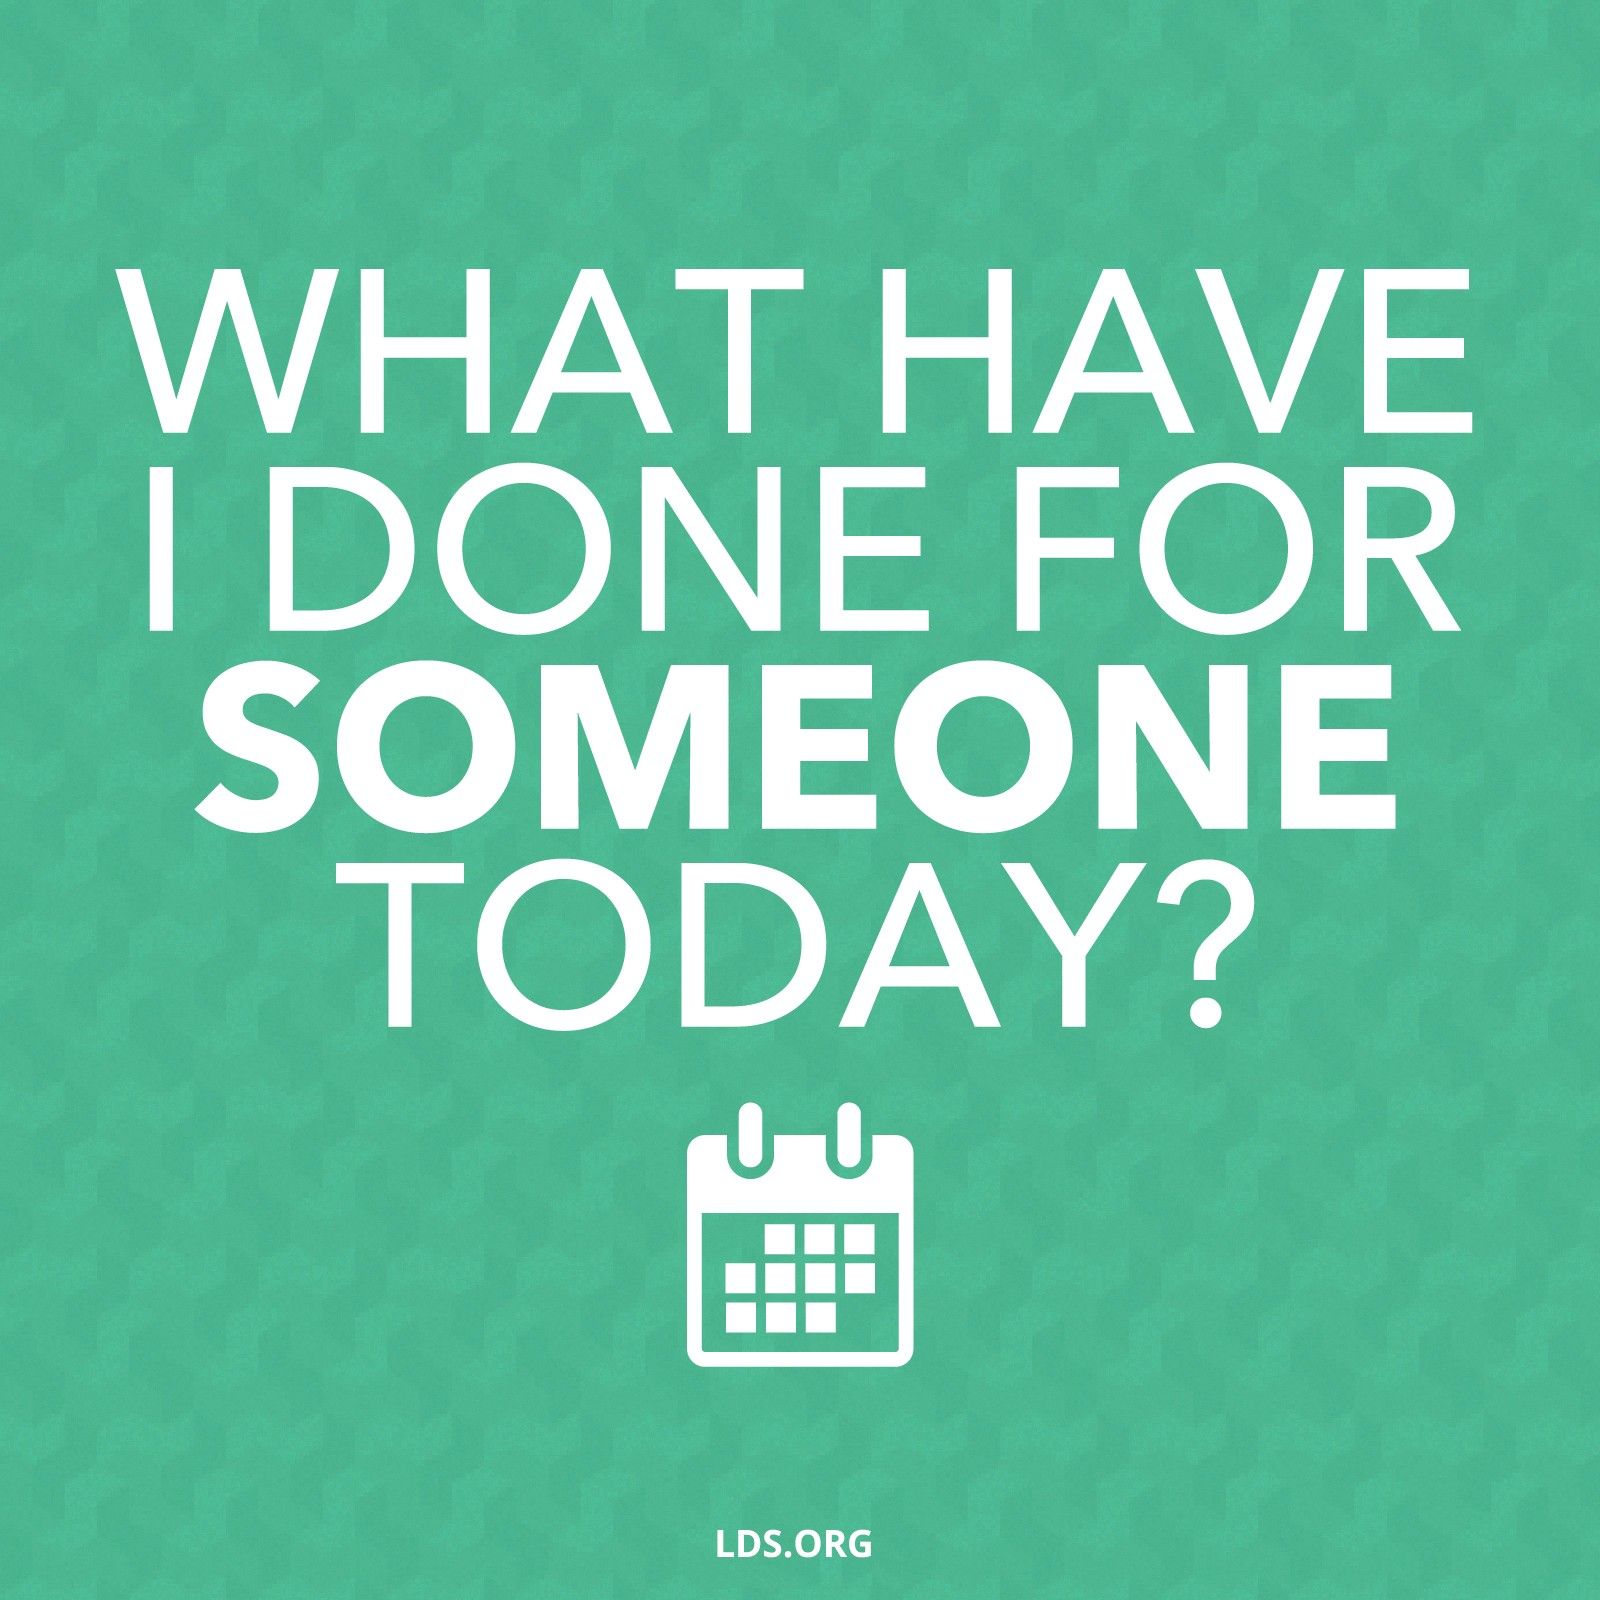 “What have I done for someone today?”—President Thomas S. Monson, “What Have I Done for Someone Today?”